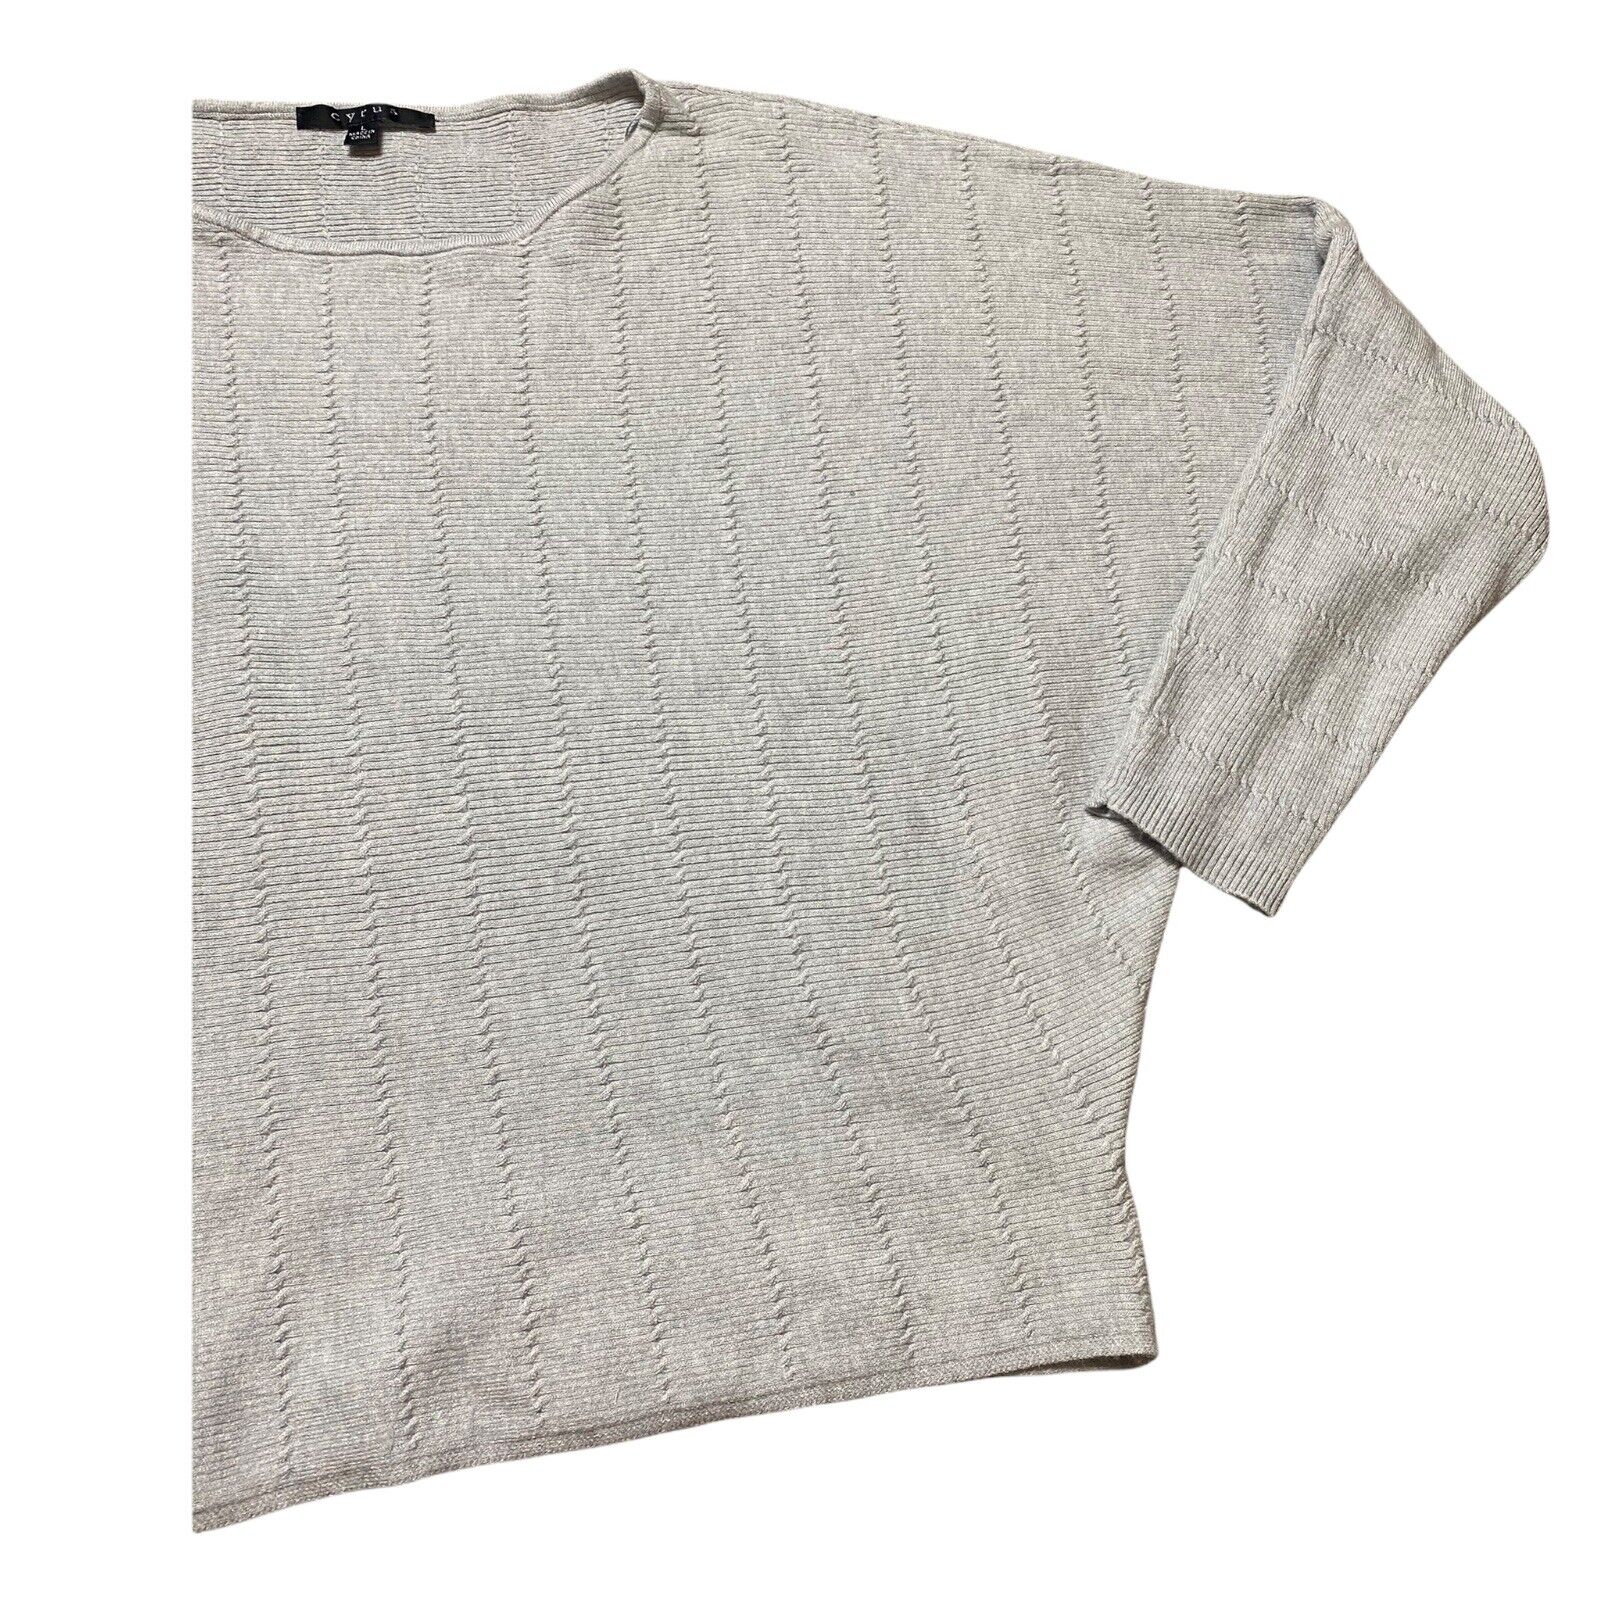 Cyrus Women L Sweater Gray Long Sleeve Pullover - image 4